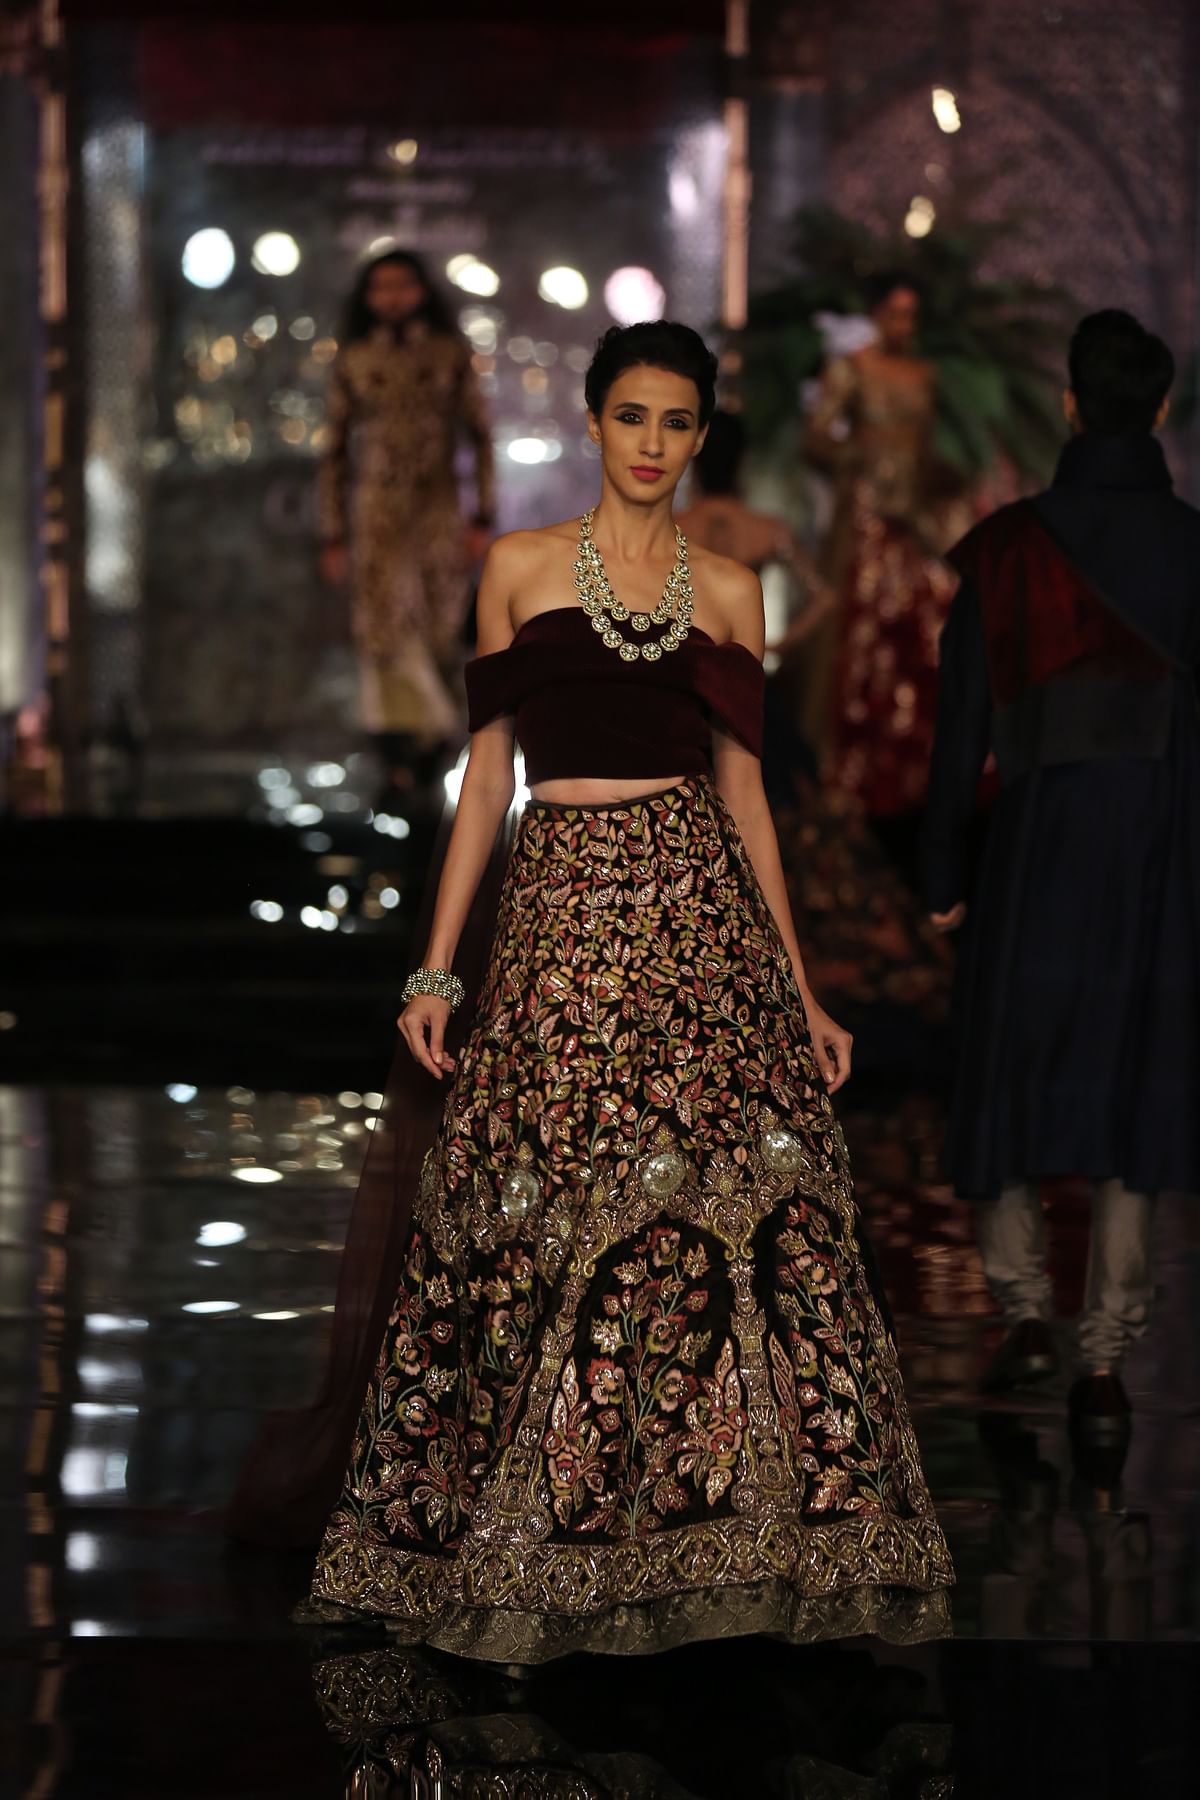 Catch all the action from India Couture Week 2016!